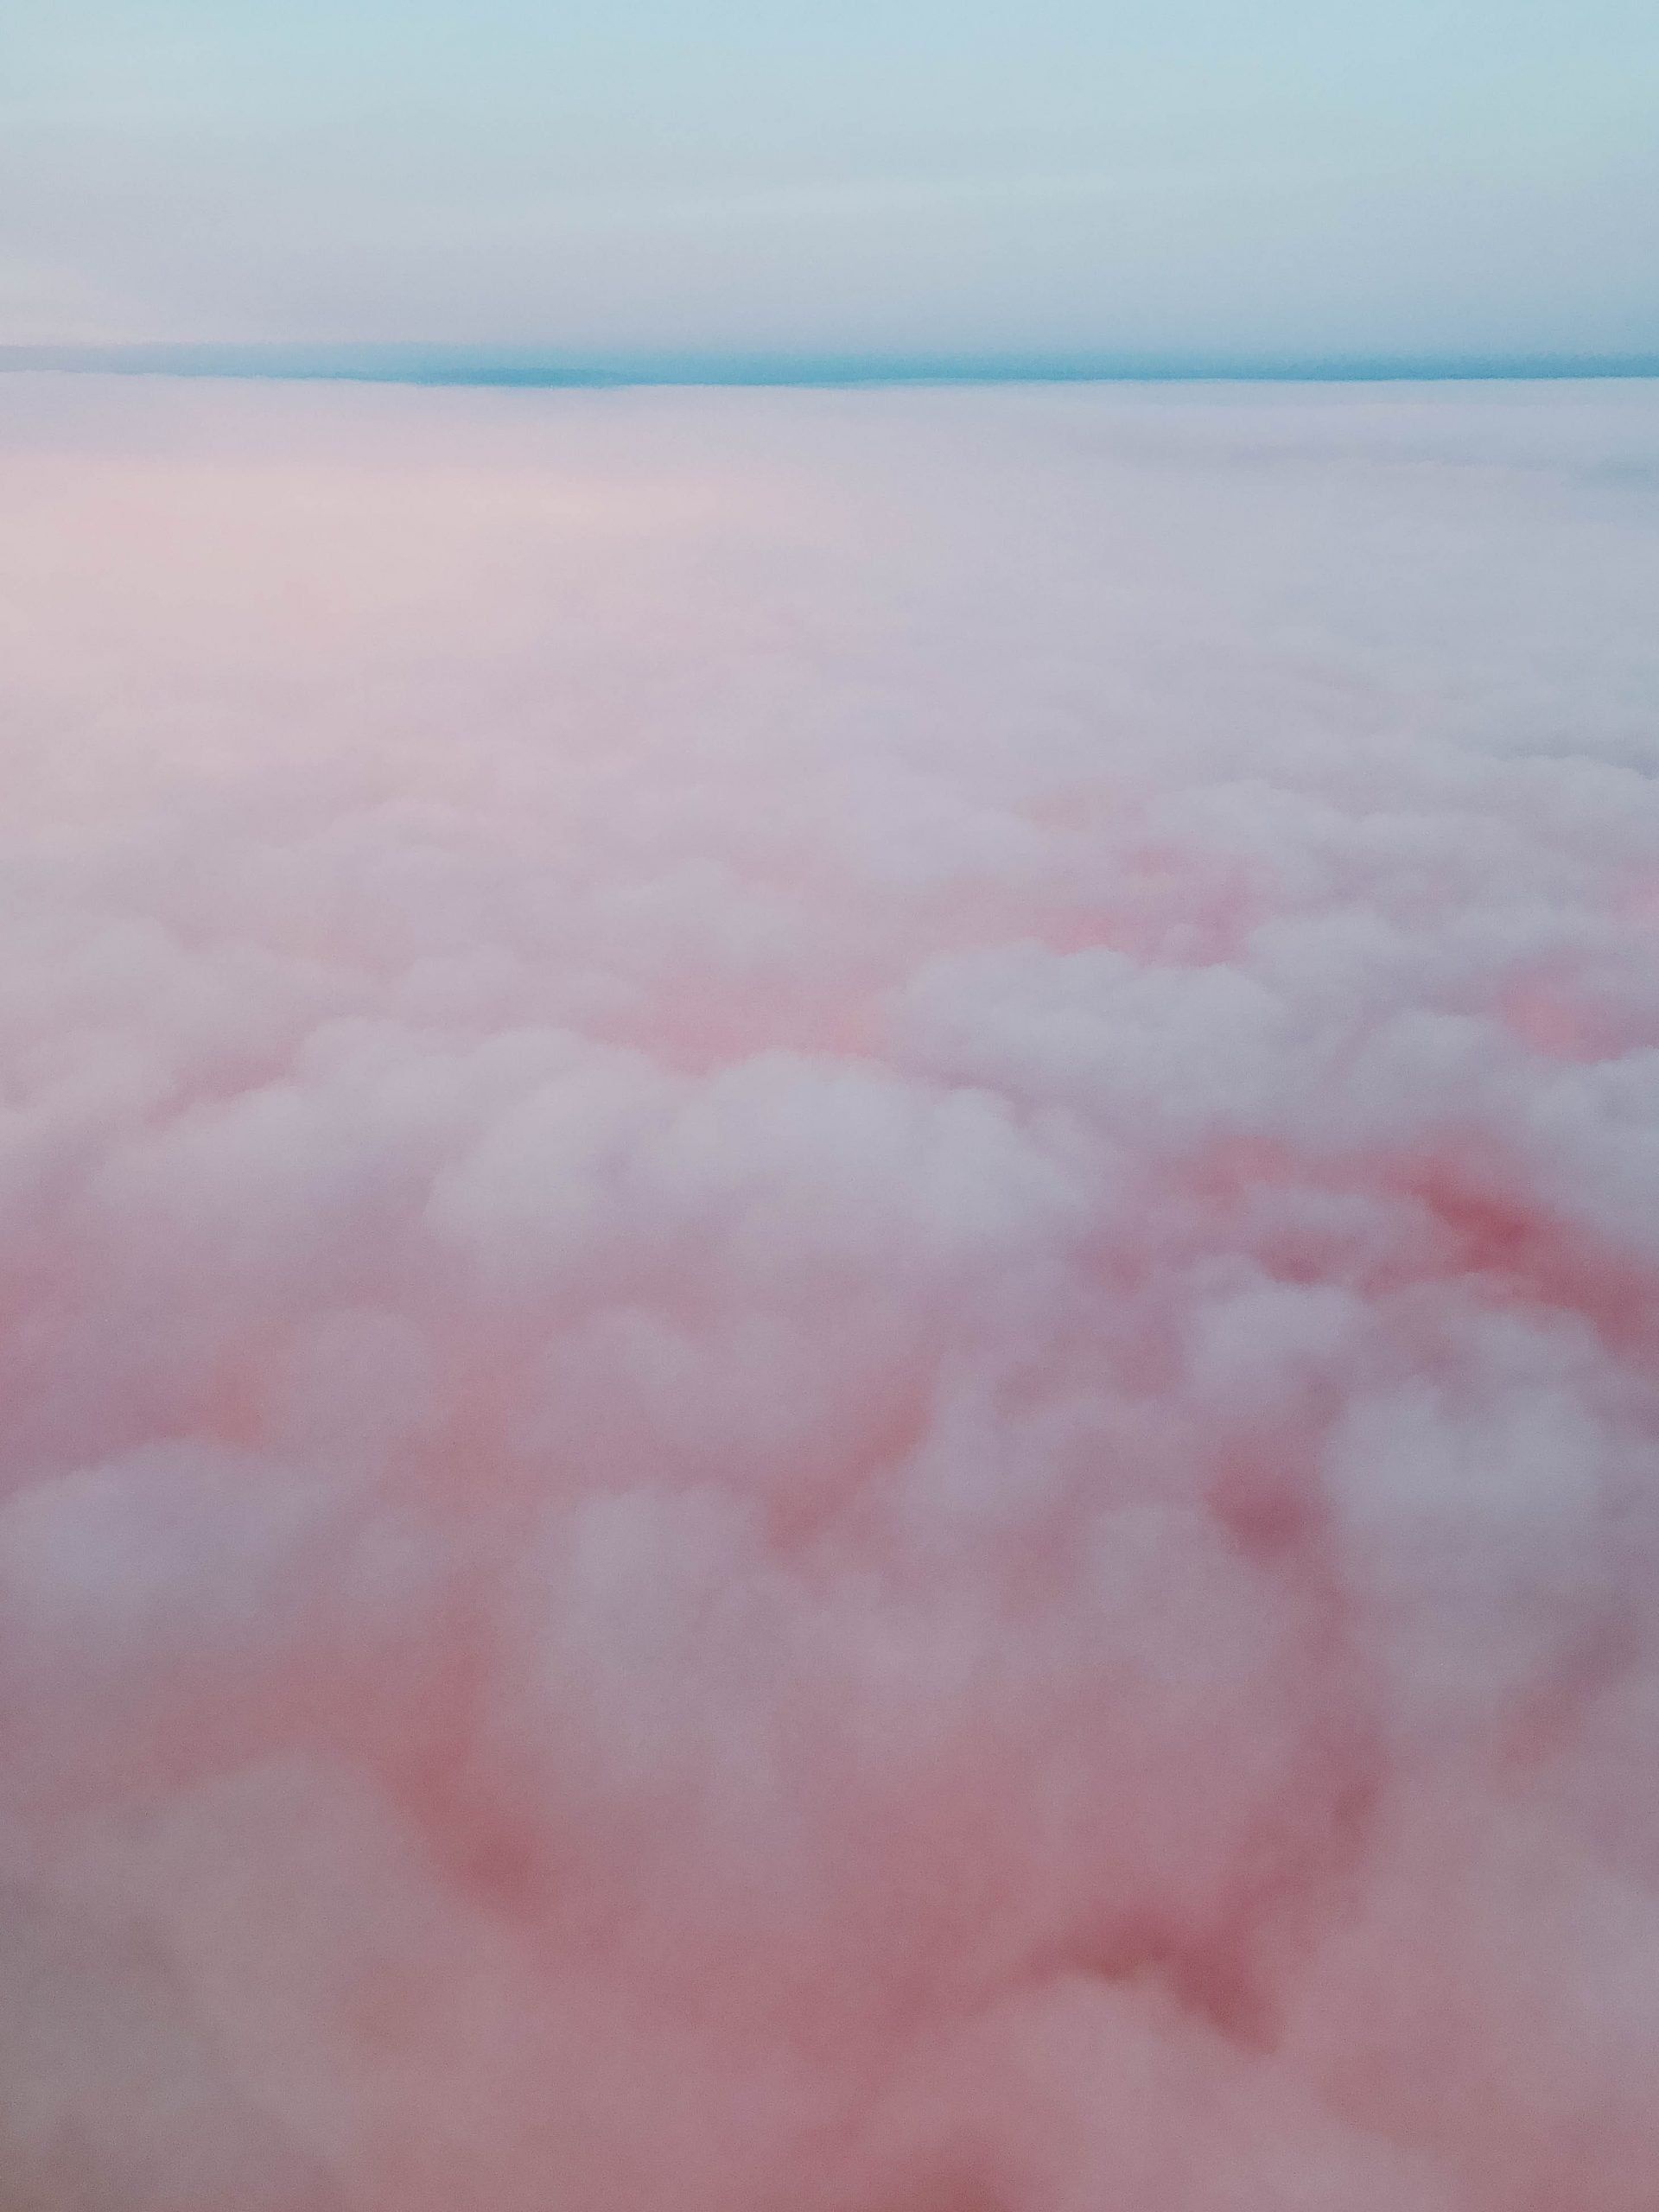 A pink cloud is in the sky - Pastel pink